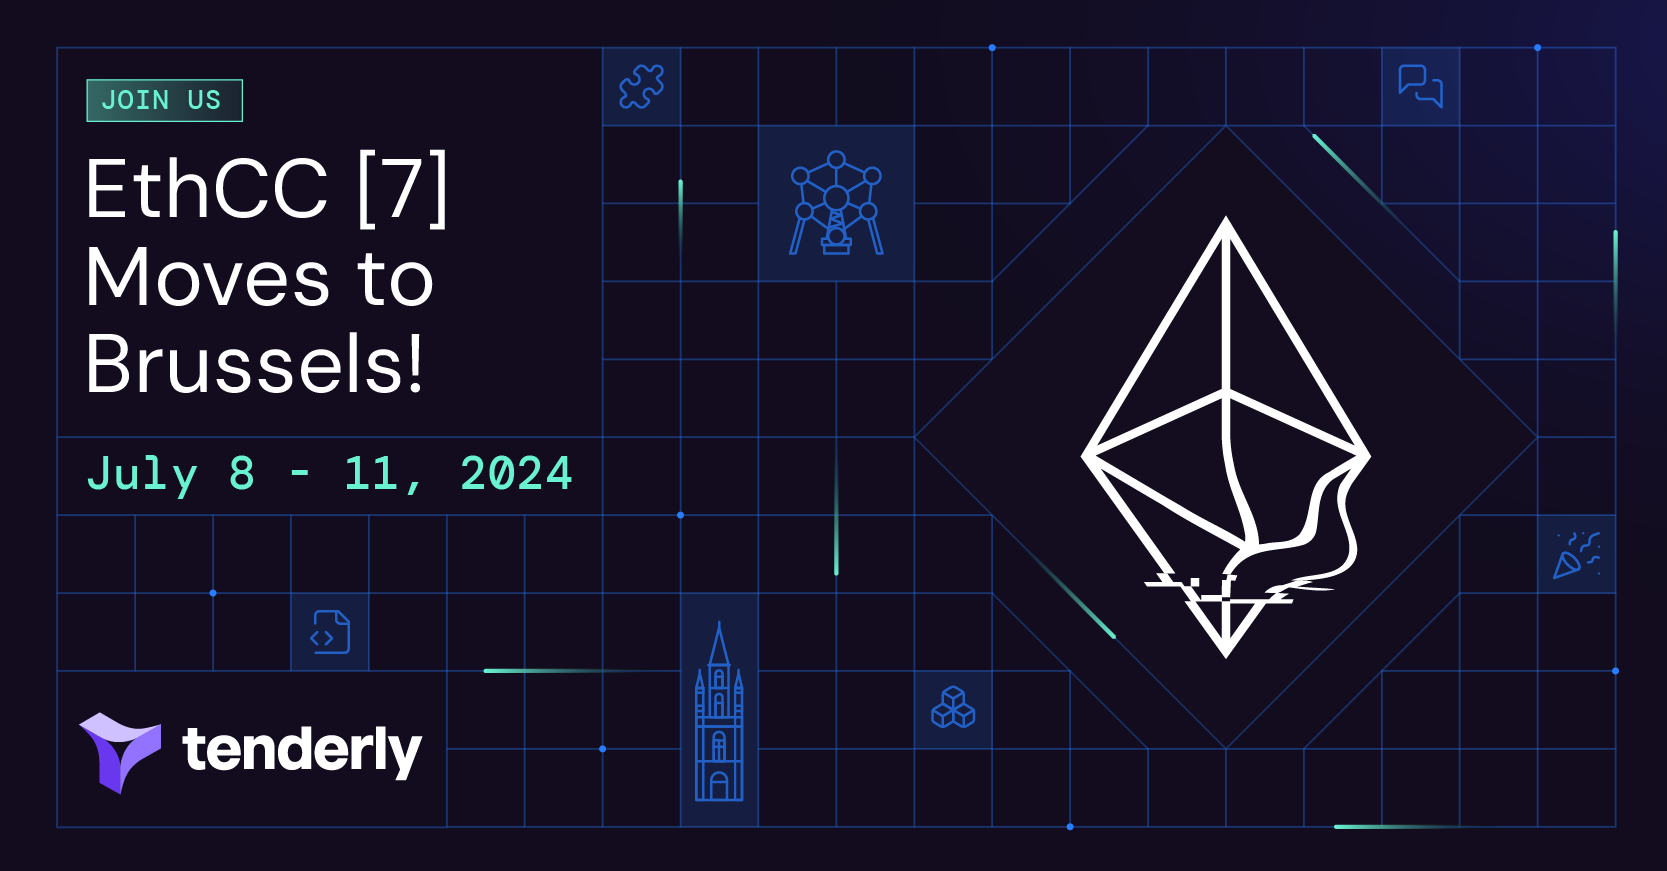 Meet us in Brussels for EthCC 7!